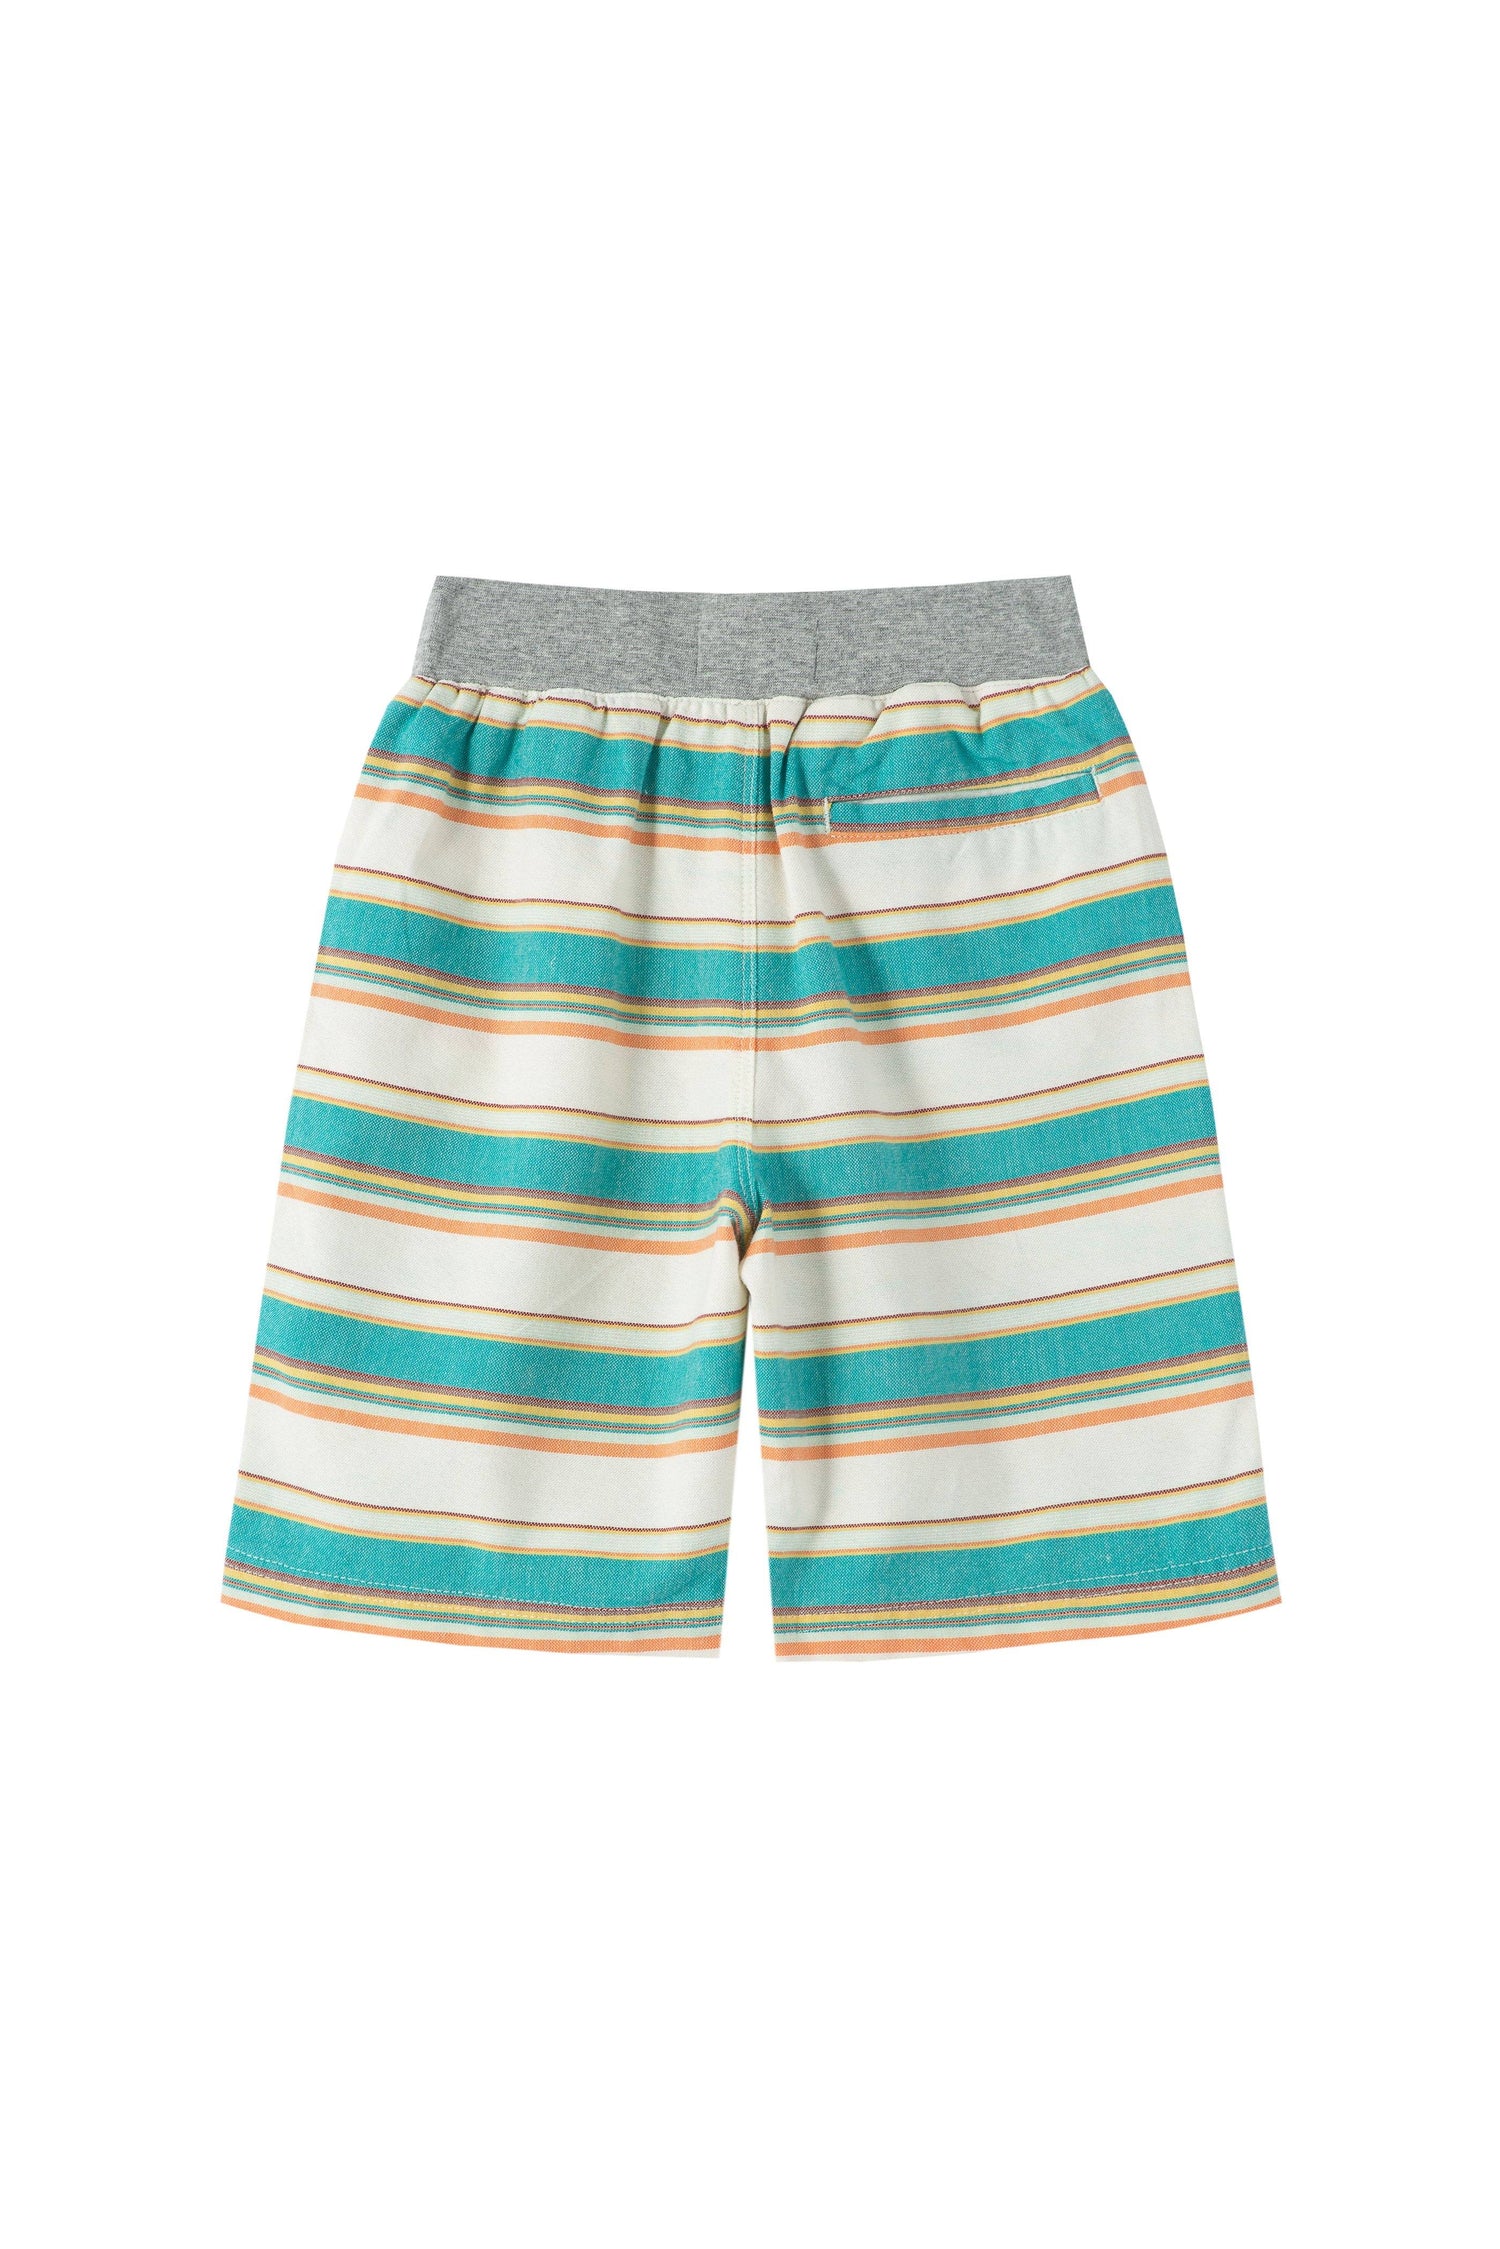 Back of blue, yellow, red striped shorts with elastic waist and one back pocket.